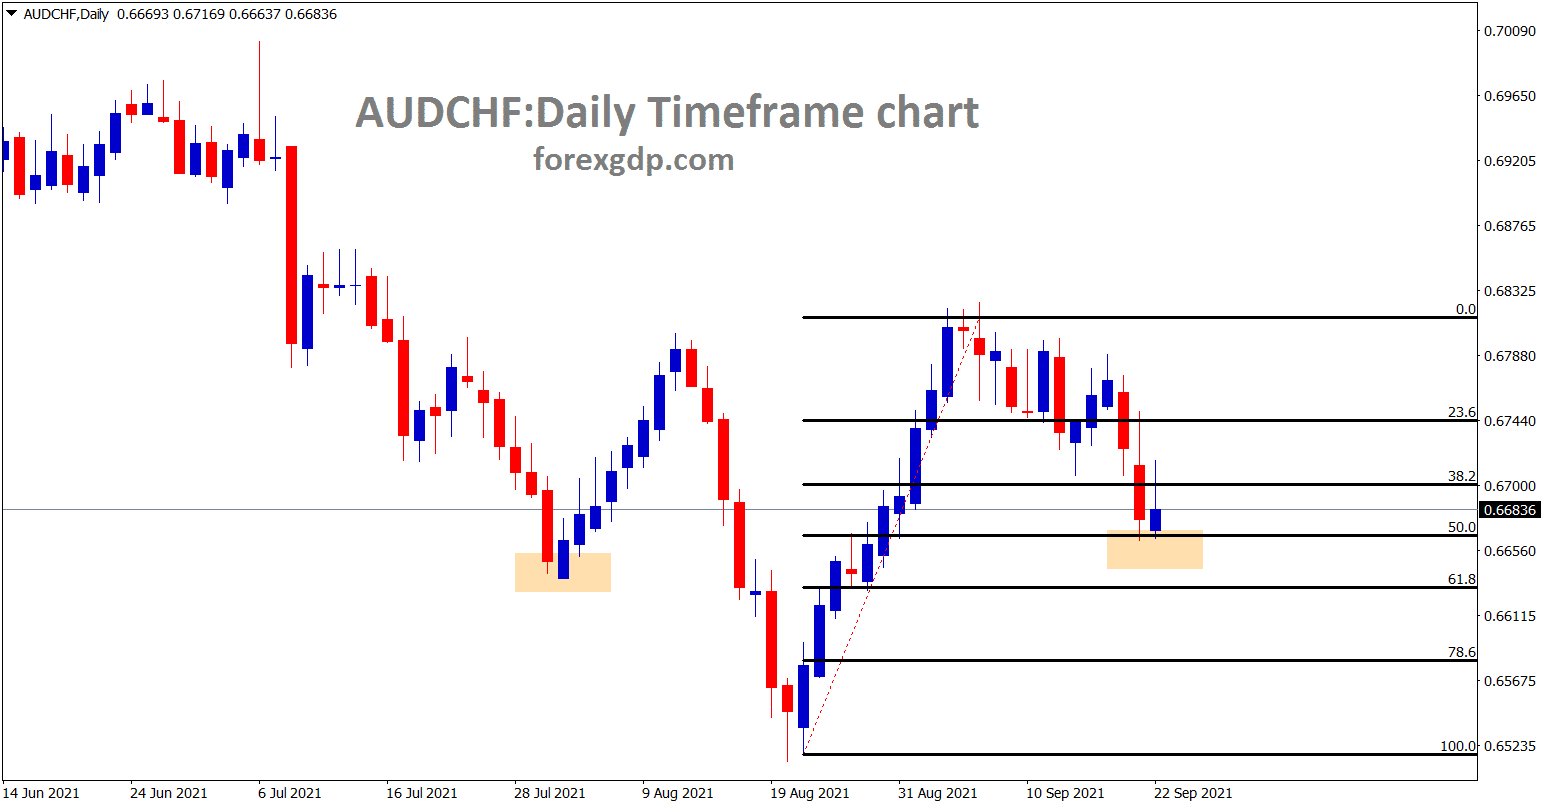 AUDCHF made a retracement of 50 wait for reversal. In another view trying to form a inverse head and shoulder pattern